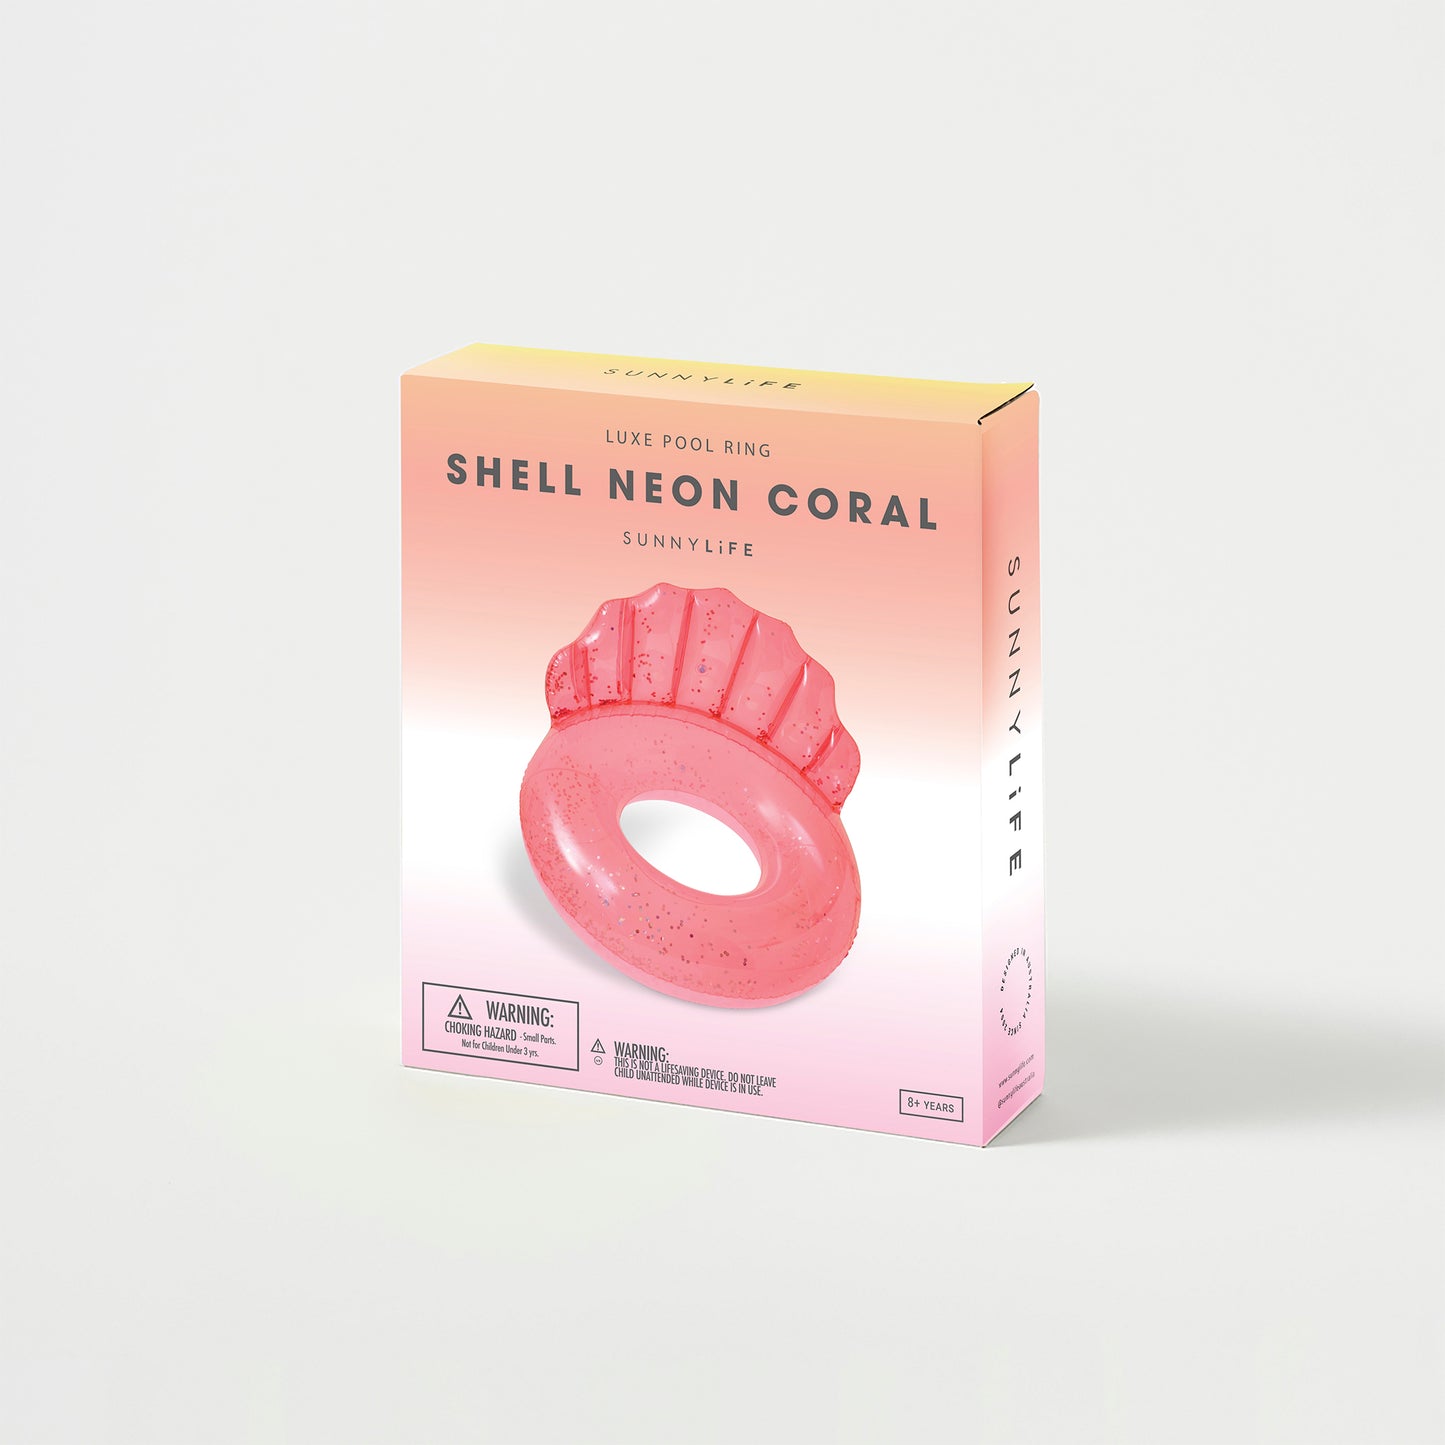 Luxe Pool Ring Shell Neon Coral Box